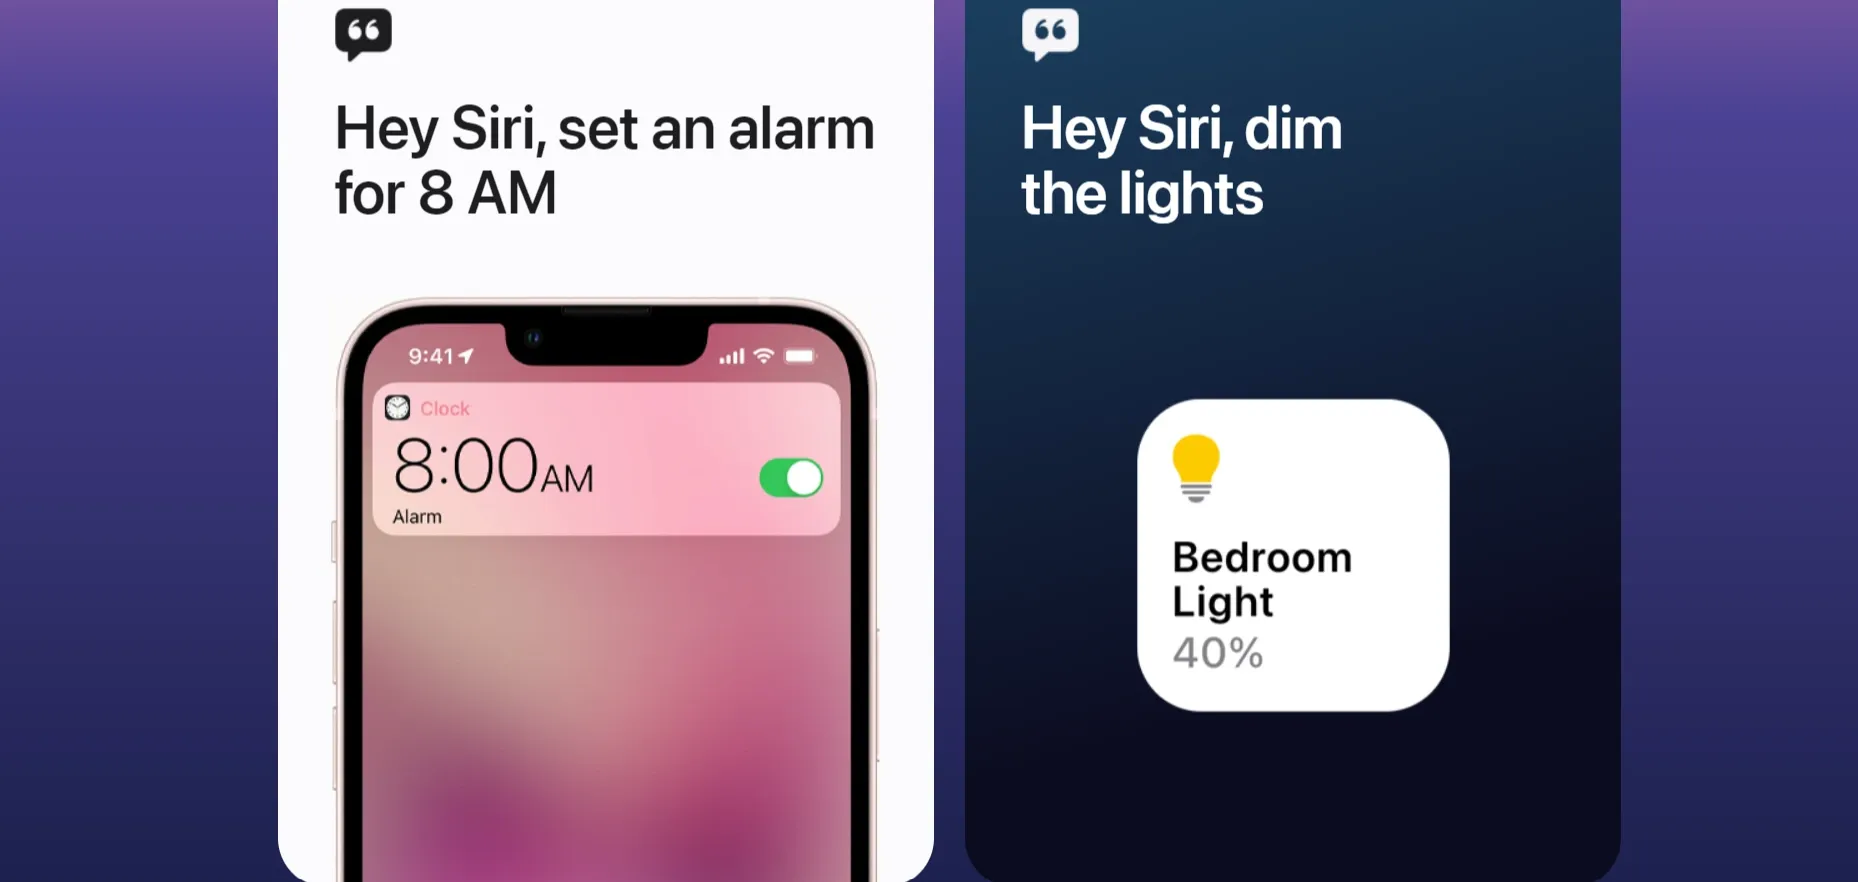 Siri Commands for phone management